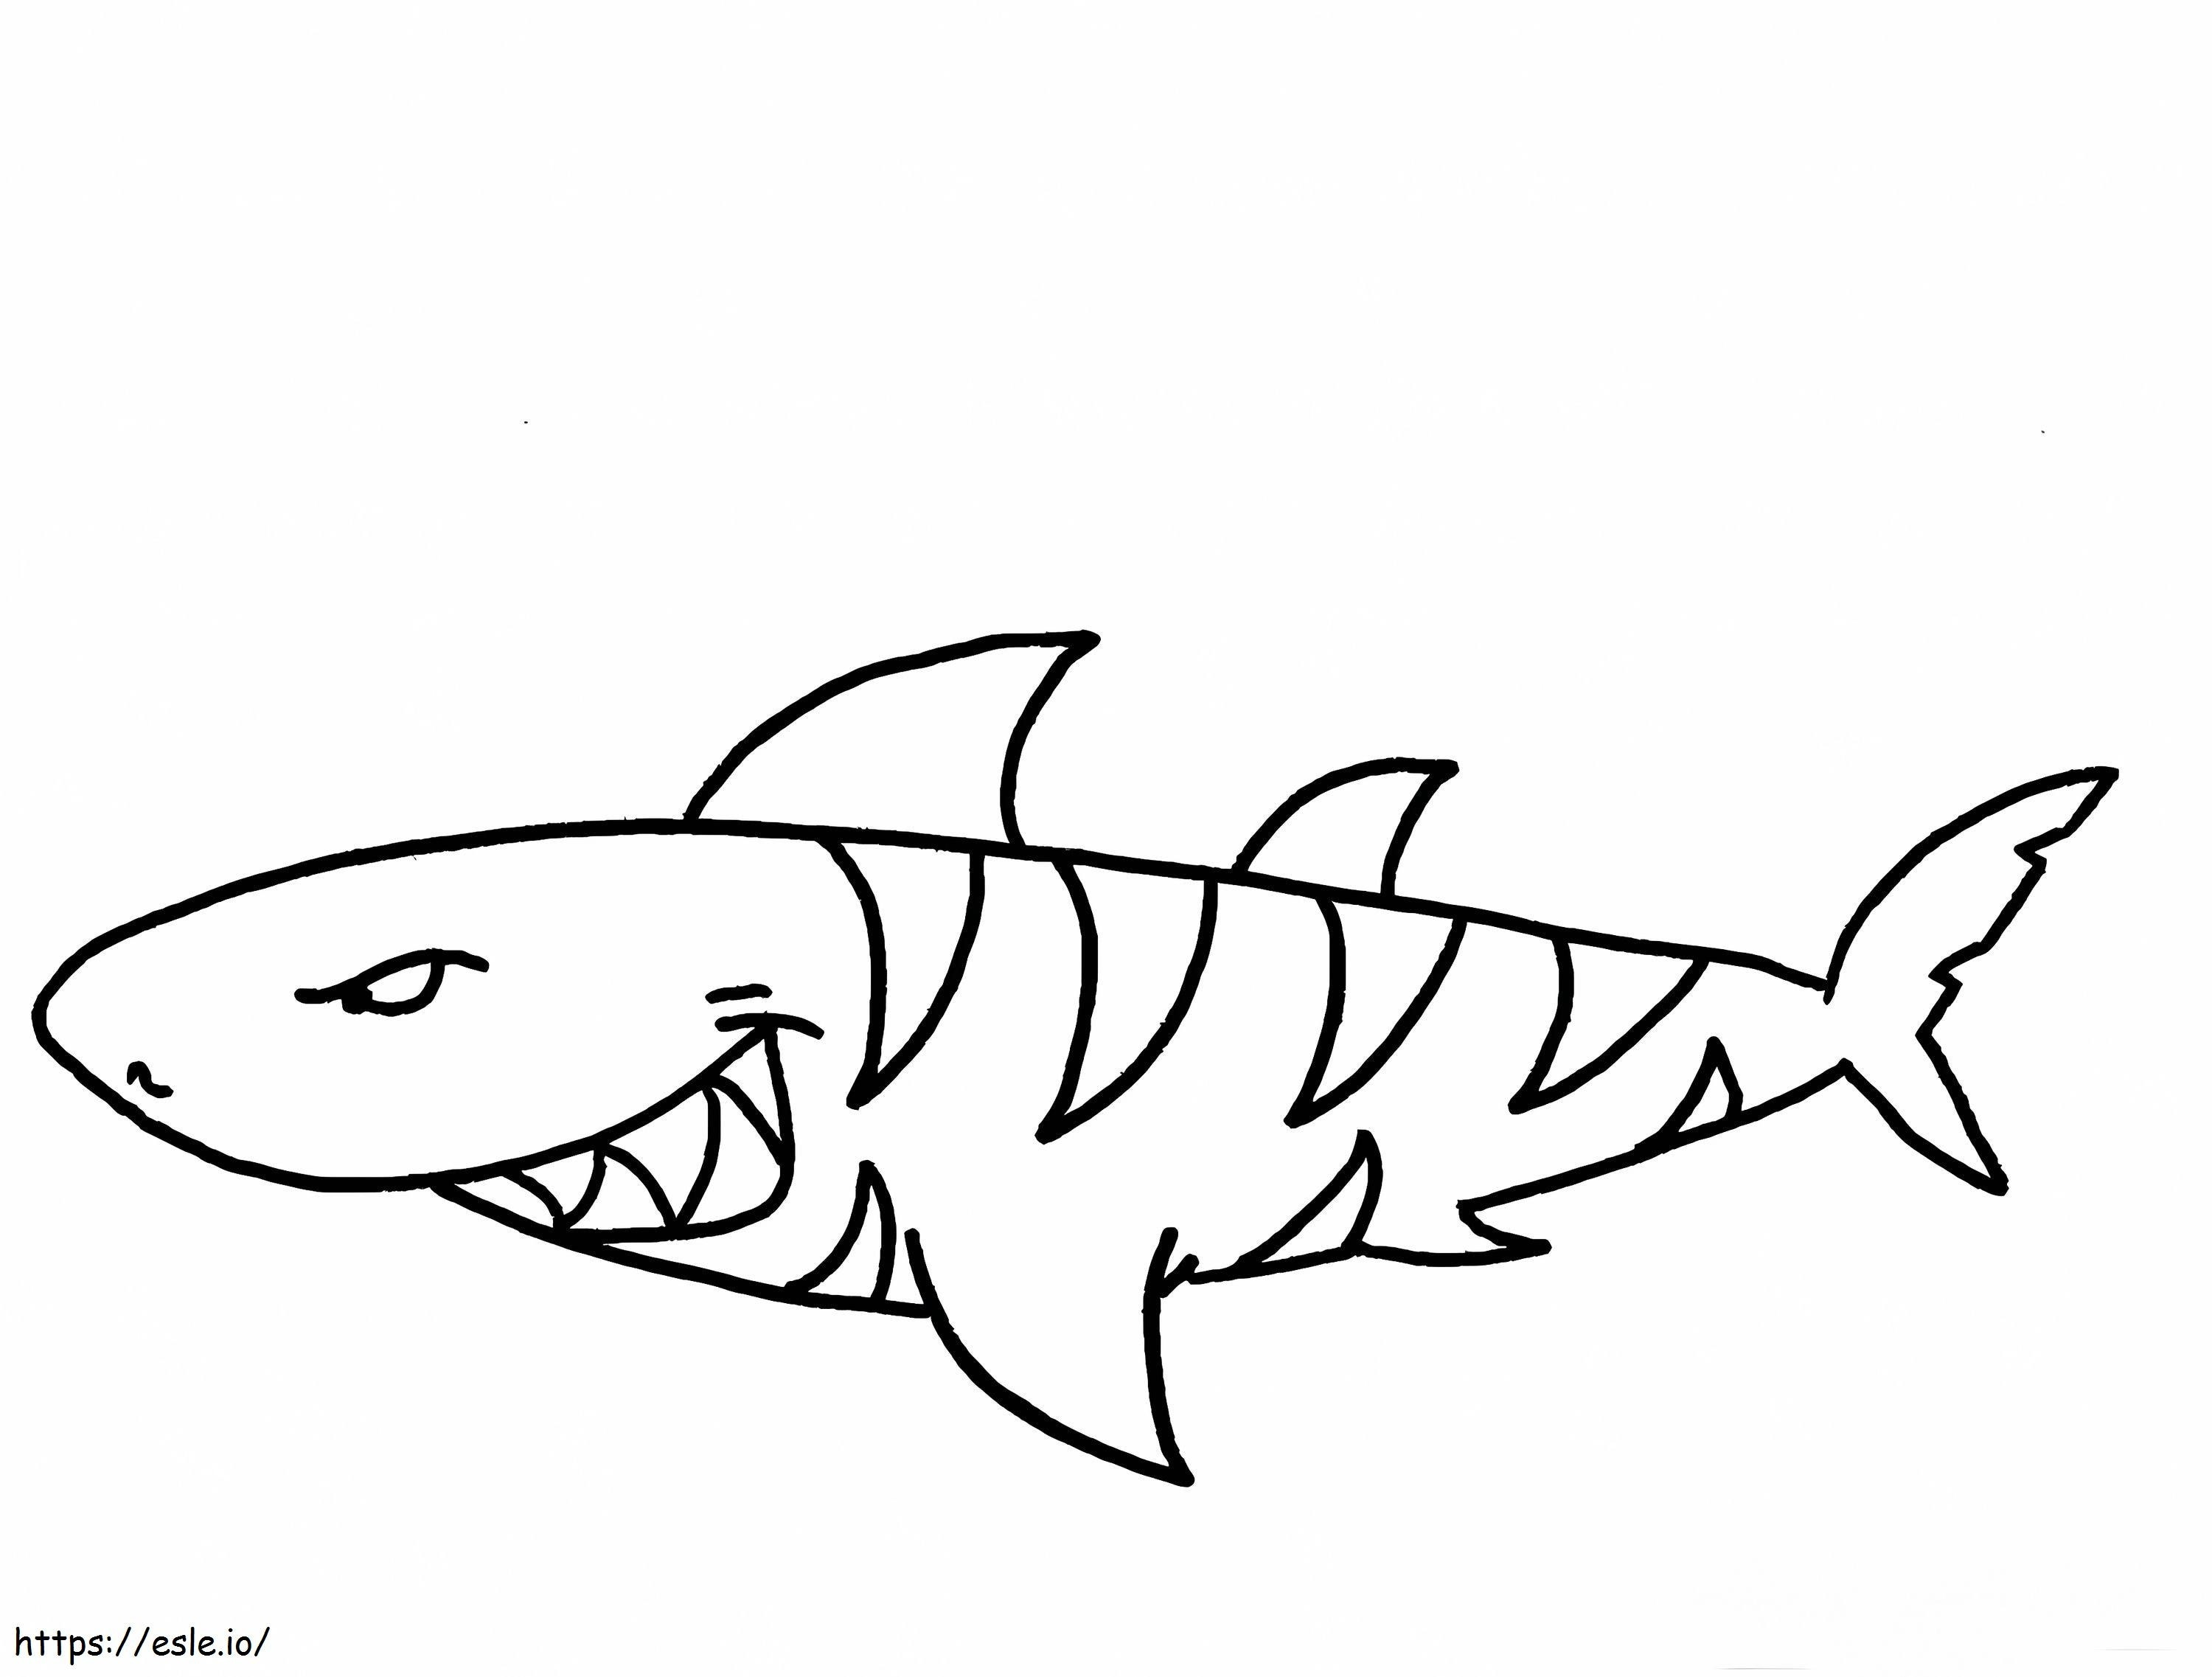 Shark 5 coloring page